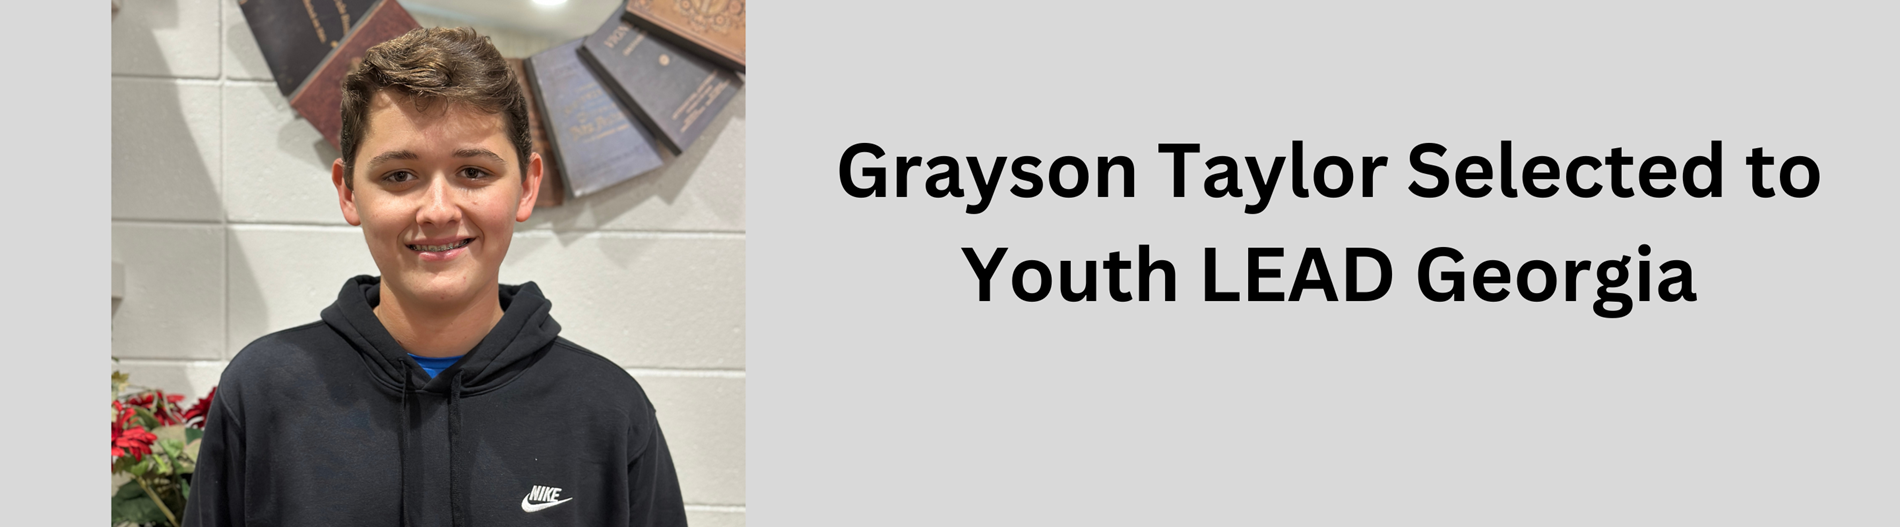 Grayson Taylor Selected to Youth LEAD Georgia